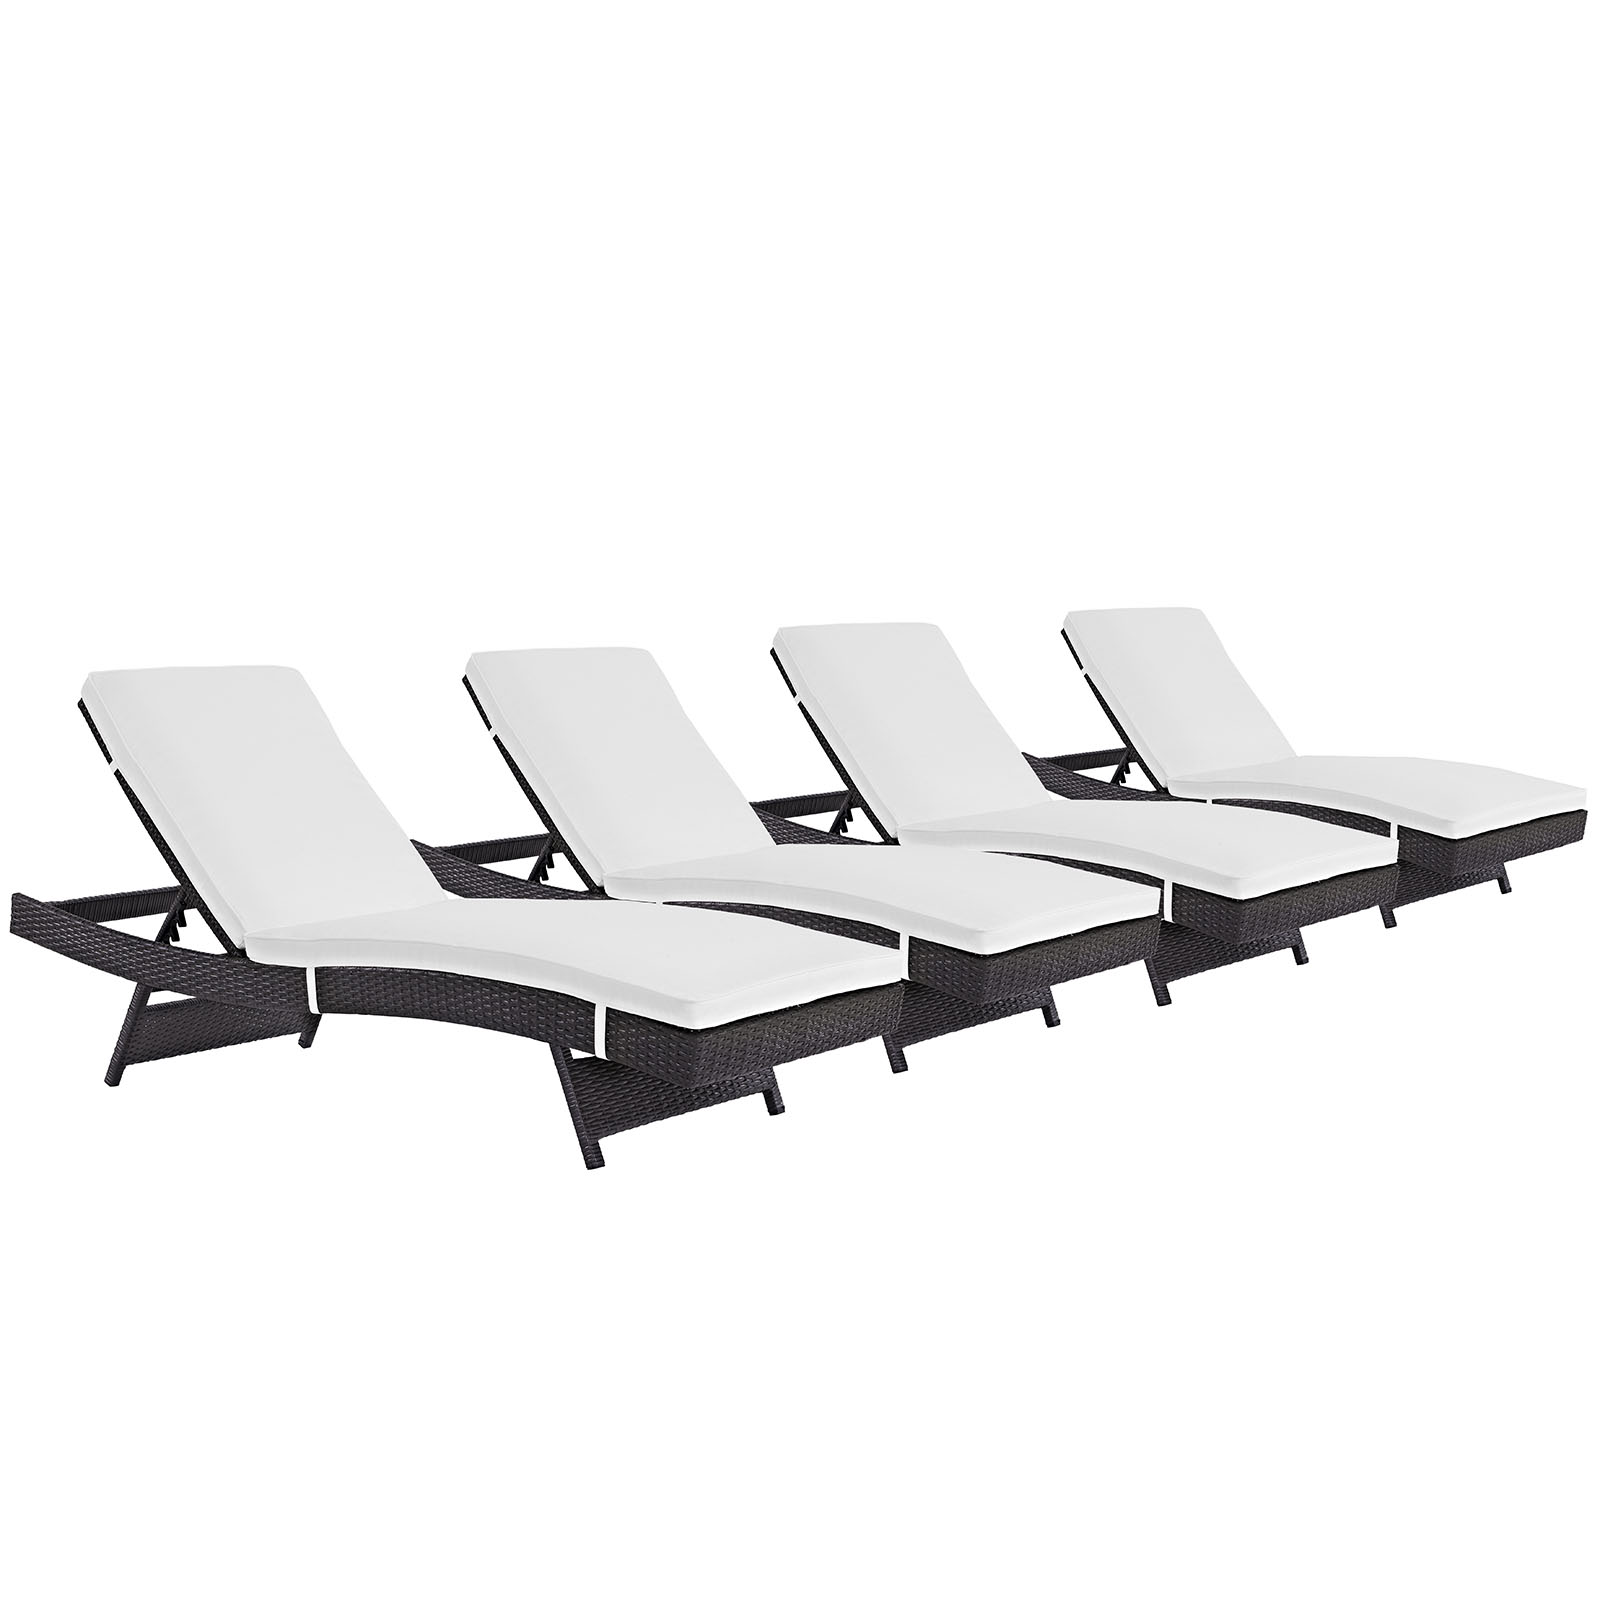 Modway Convene Chaise Outdoor Patio Set of 4 in Espresso White - image 2 of 5